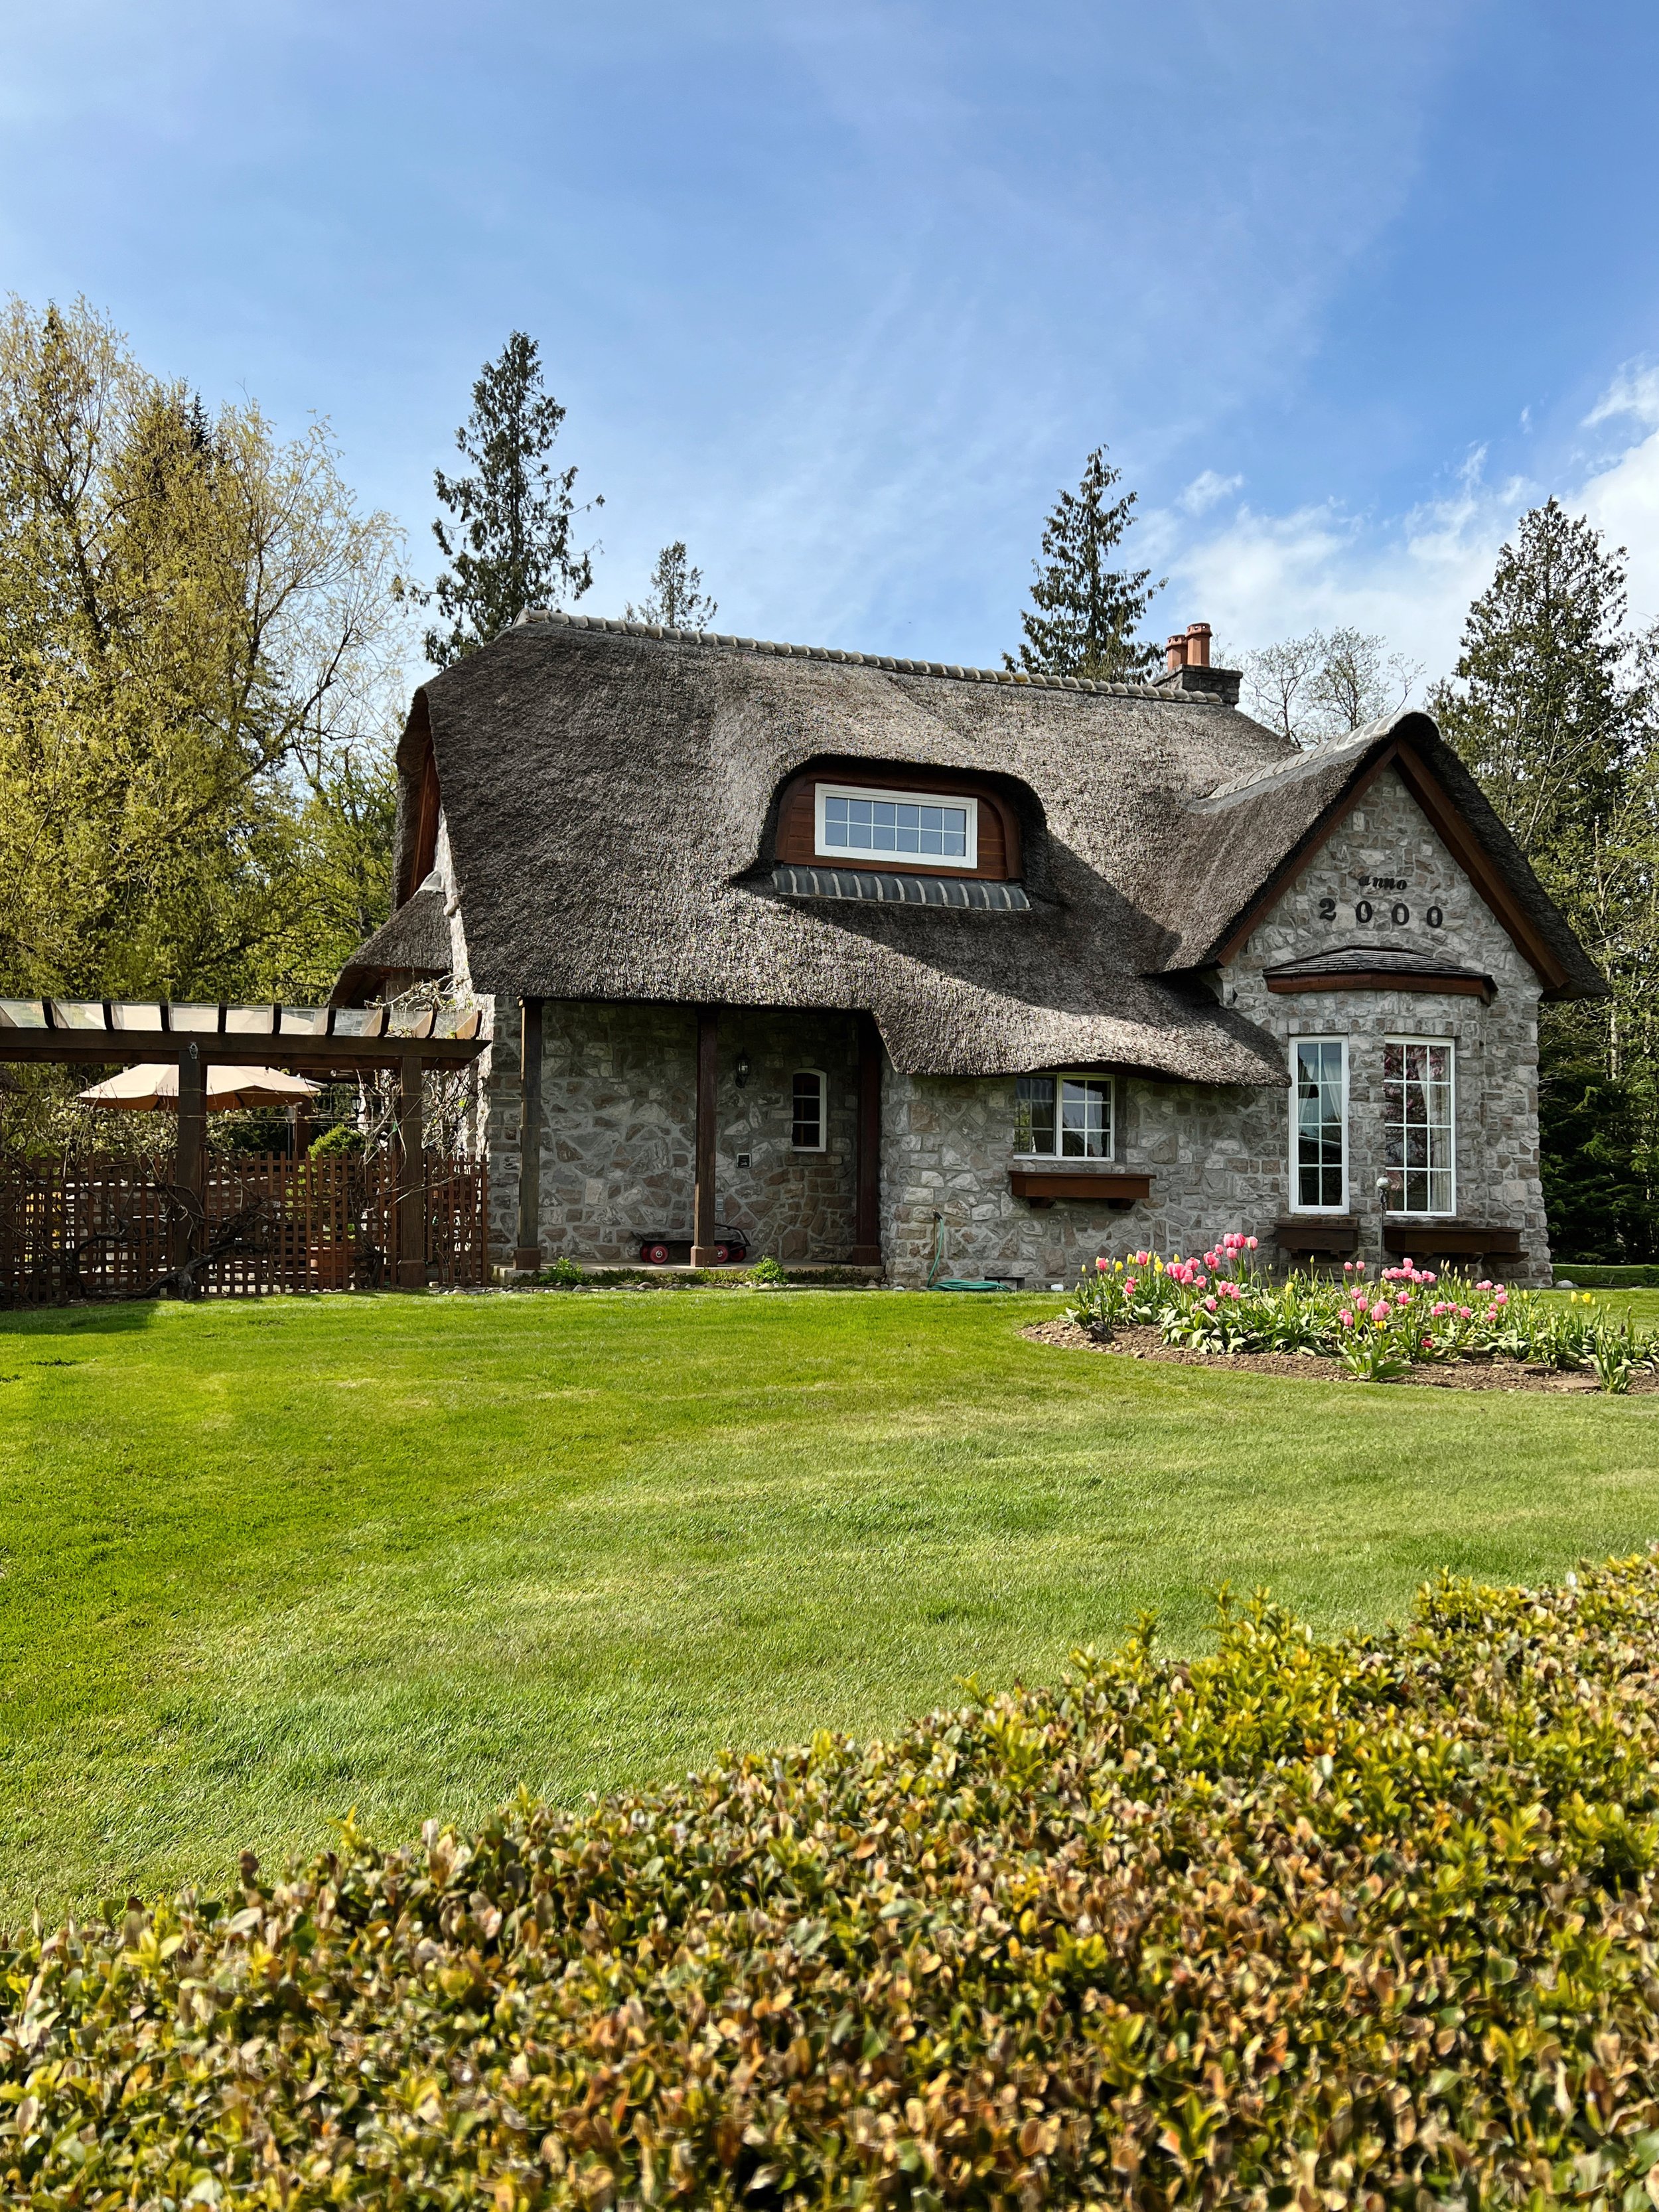 Thatched Roof house in Lynden Washington